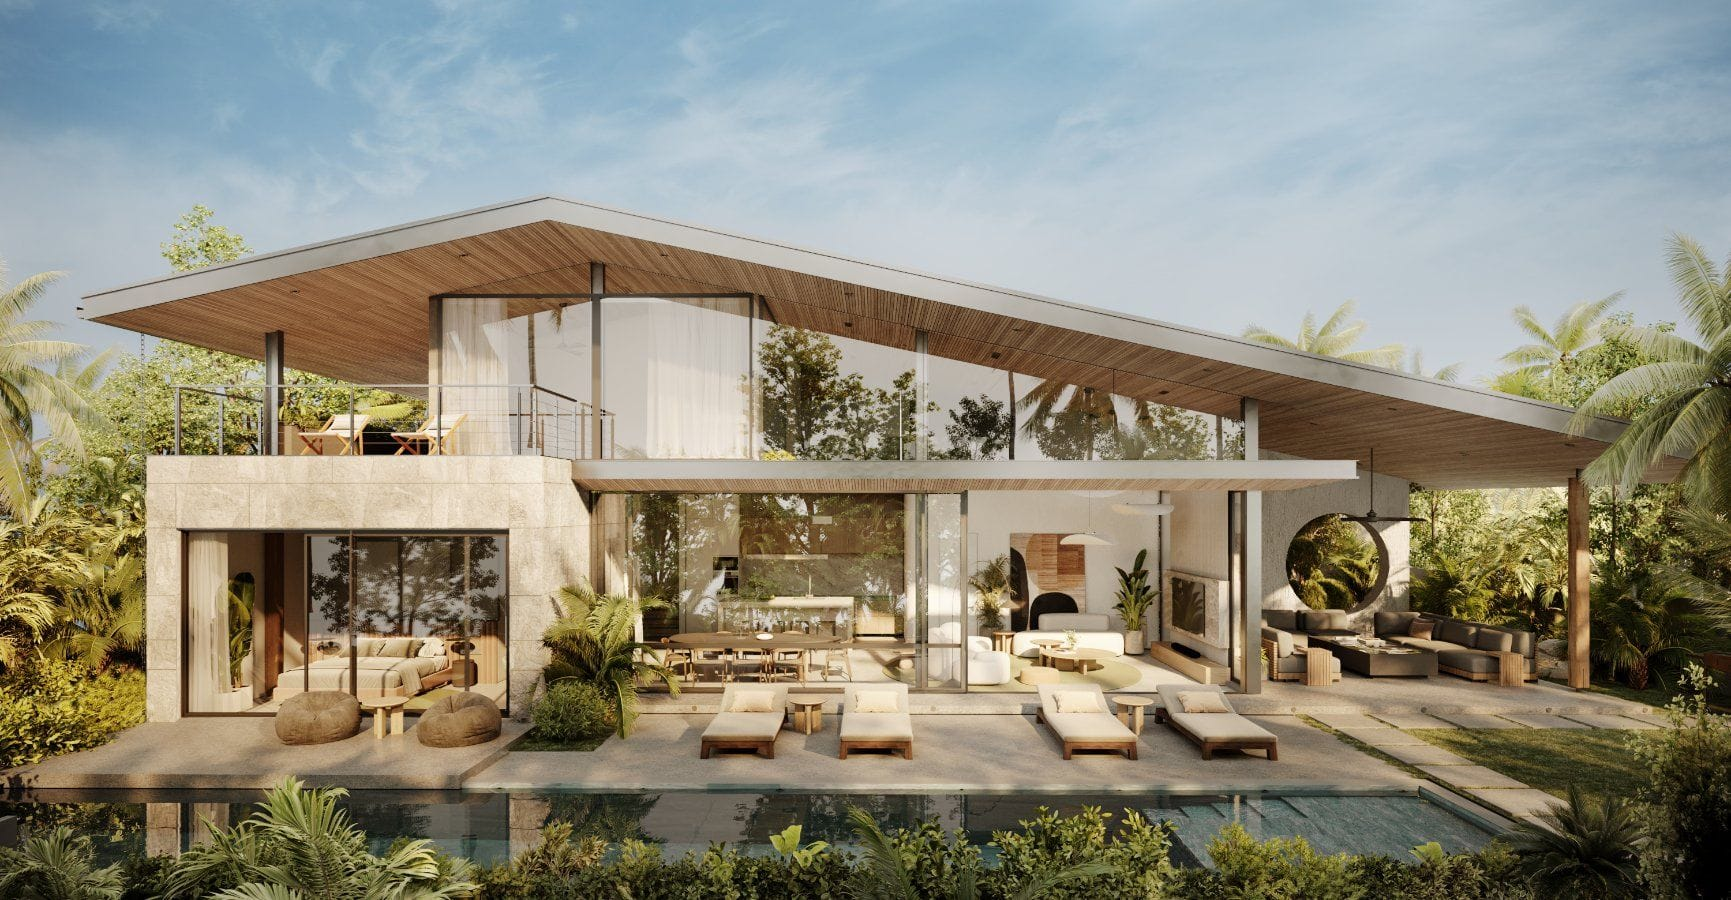 A rendering of a LIOM luxury villa in a tropical setting.